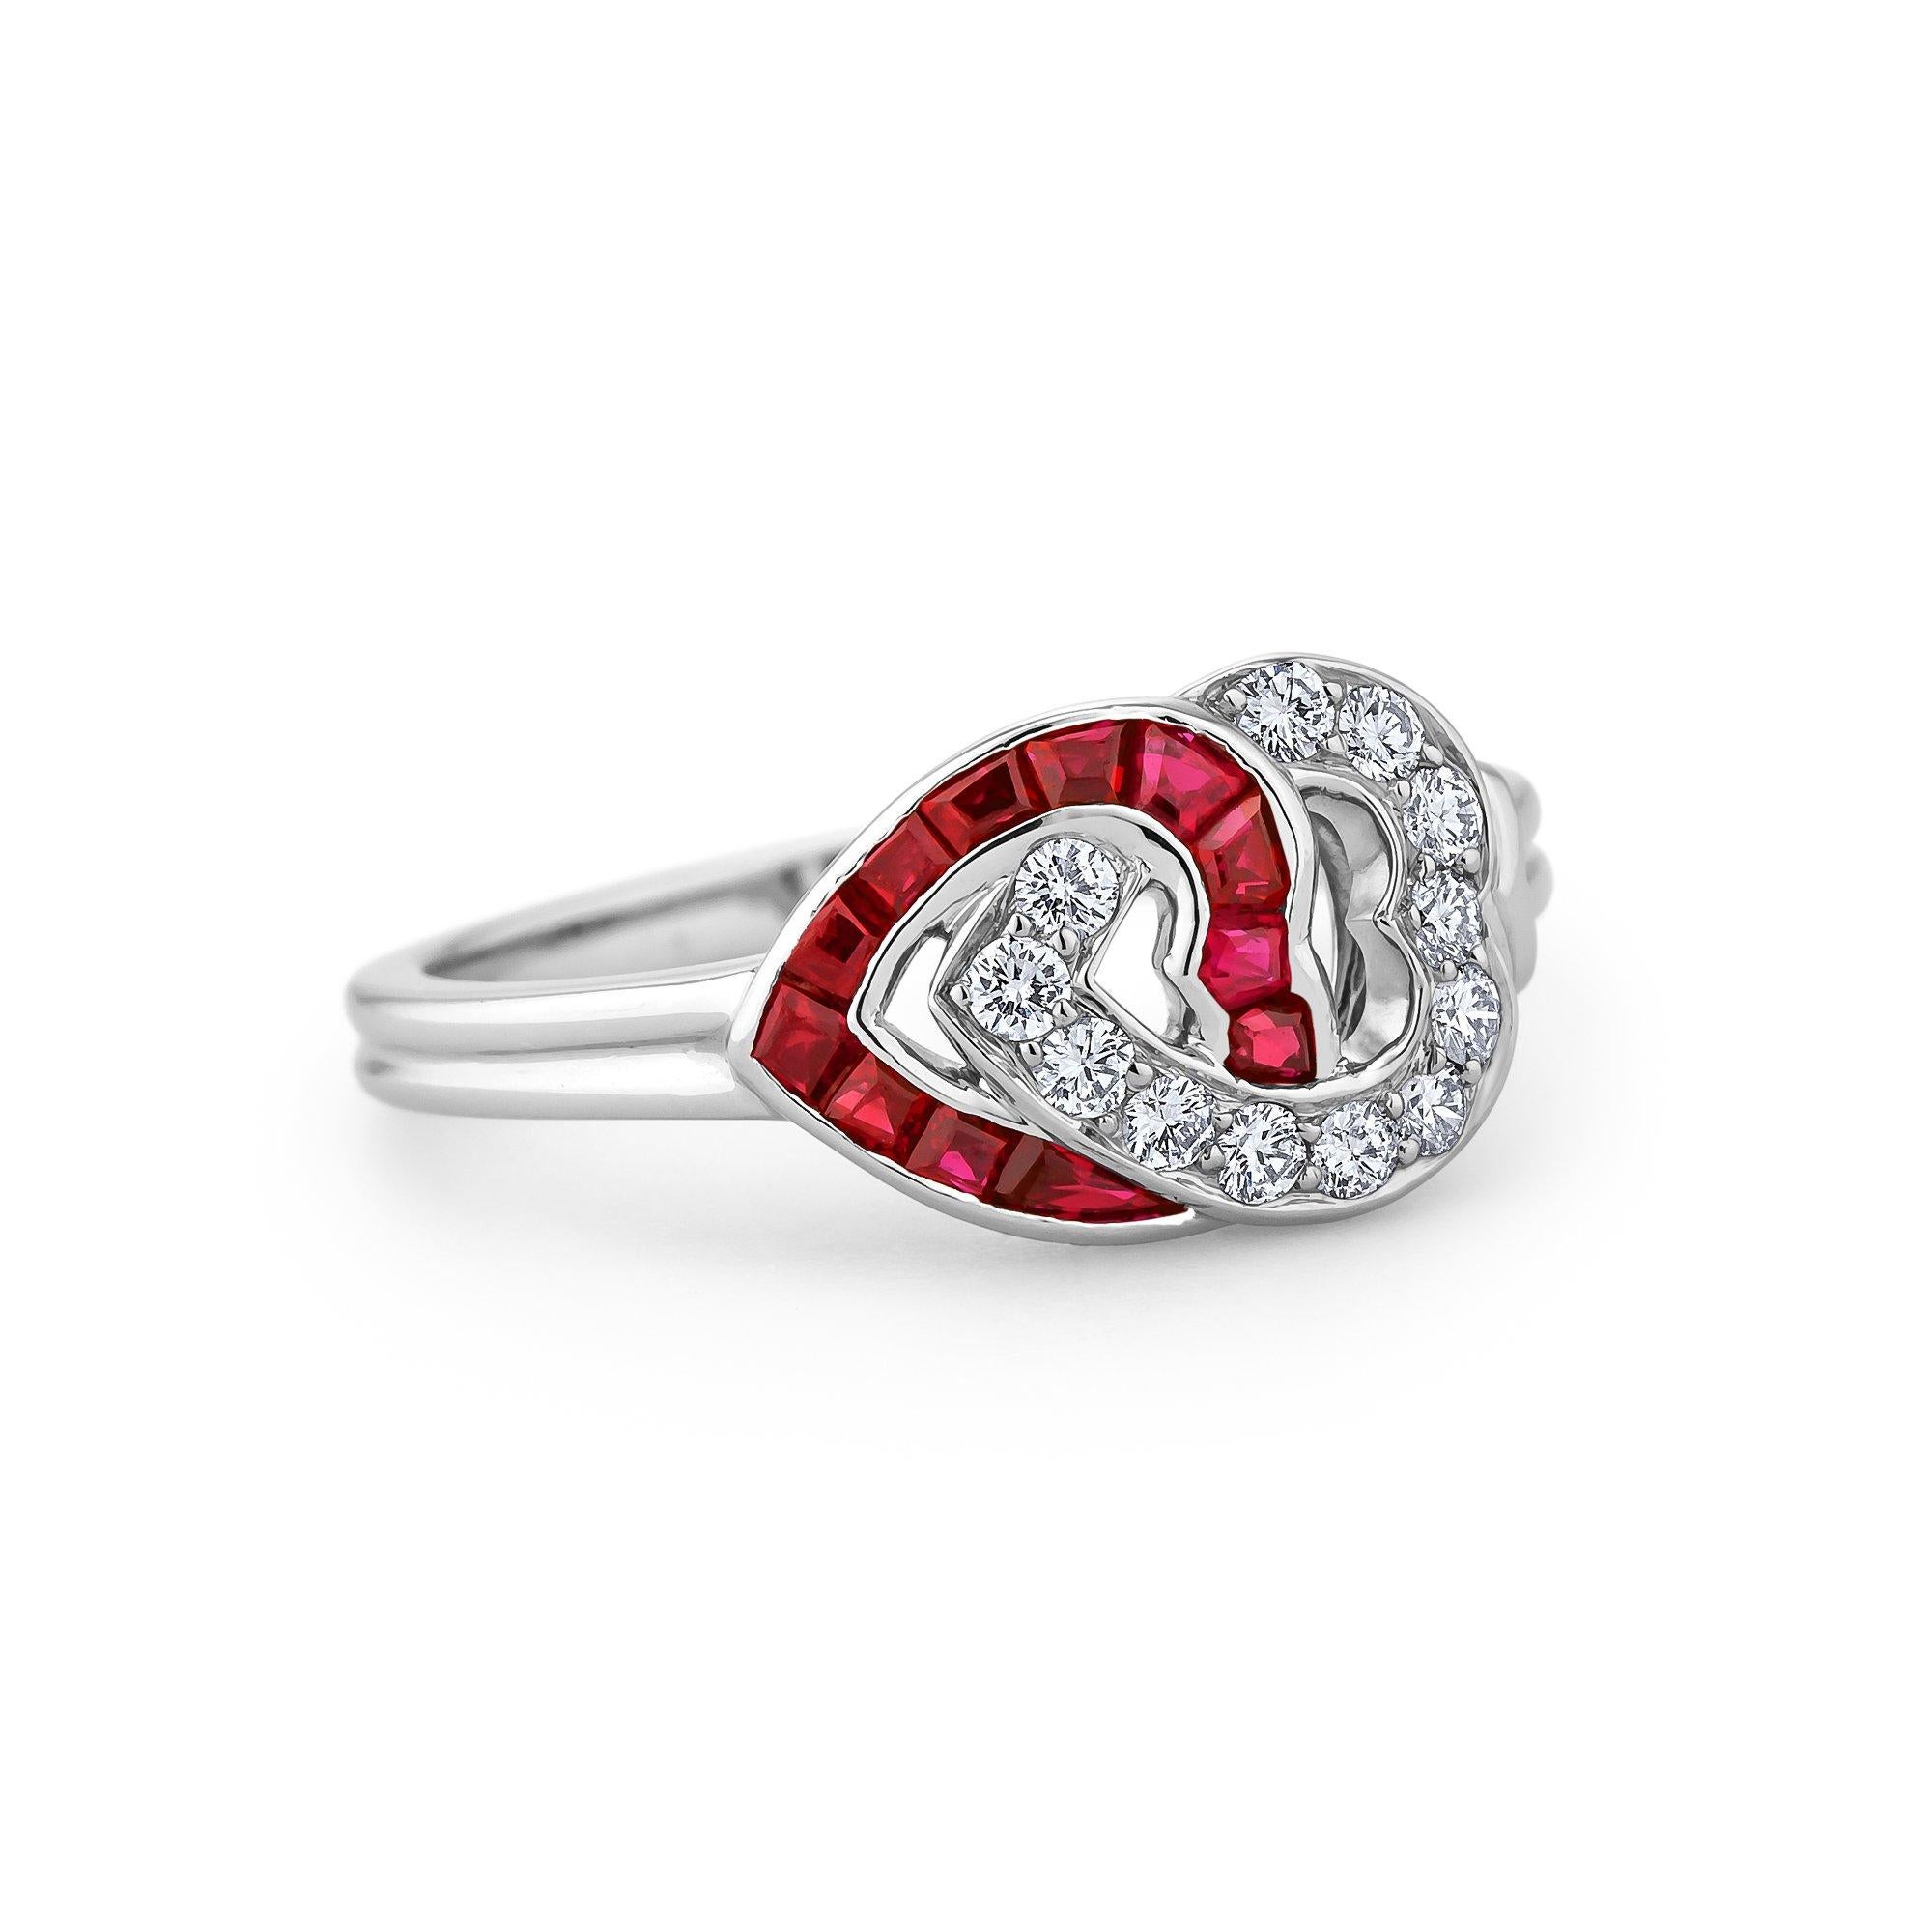 This vintage Cartier ring proves that 'two hearts really can beat as one'.  With one diamond and one ruby heart perfectly intertwined as a whole, this ring speaks of eternal love and commitment.  12 round cut diamonds with a total weight of